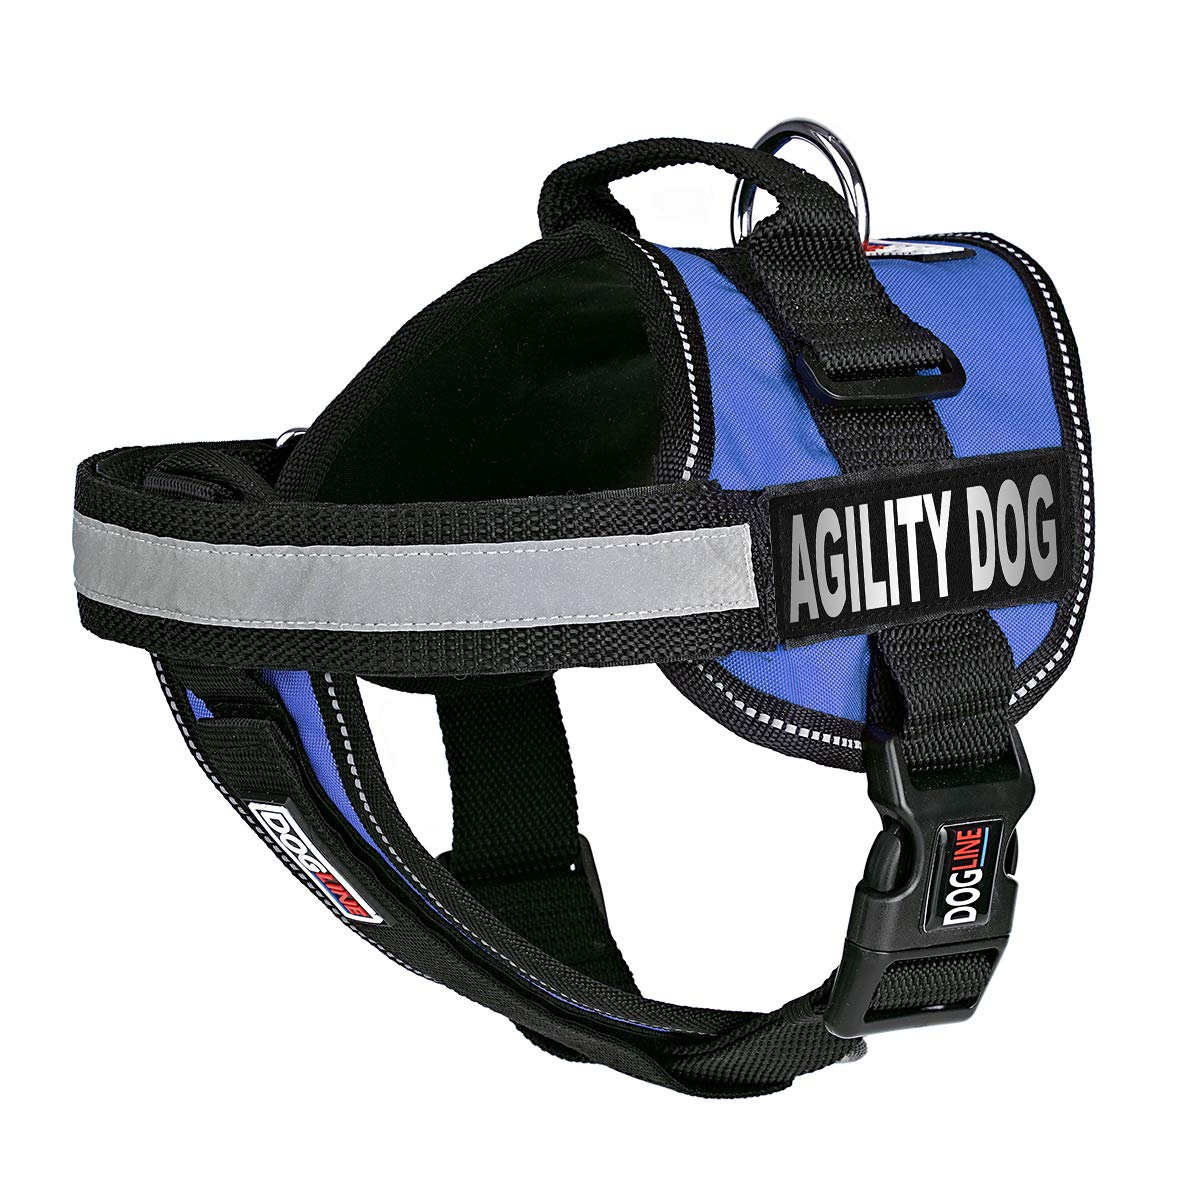 Dogline Unimax Multi-Purpose Vest Harness for Dogs and 2 Removable Agility Dog Patches, X-Large, Blue